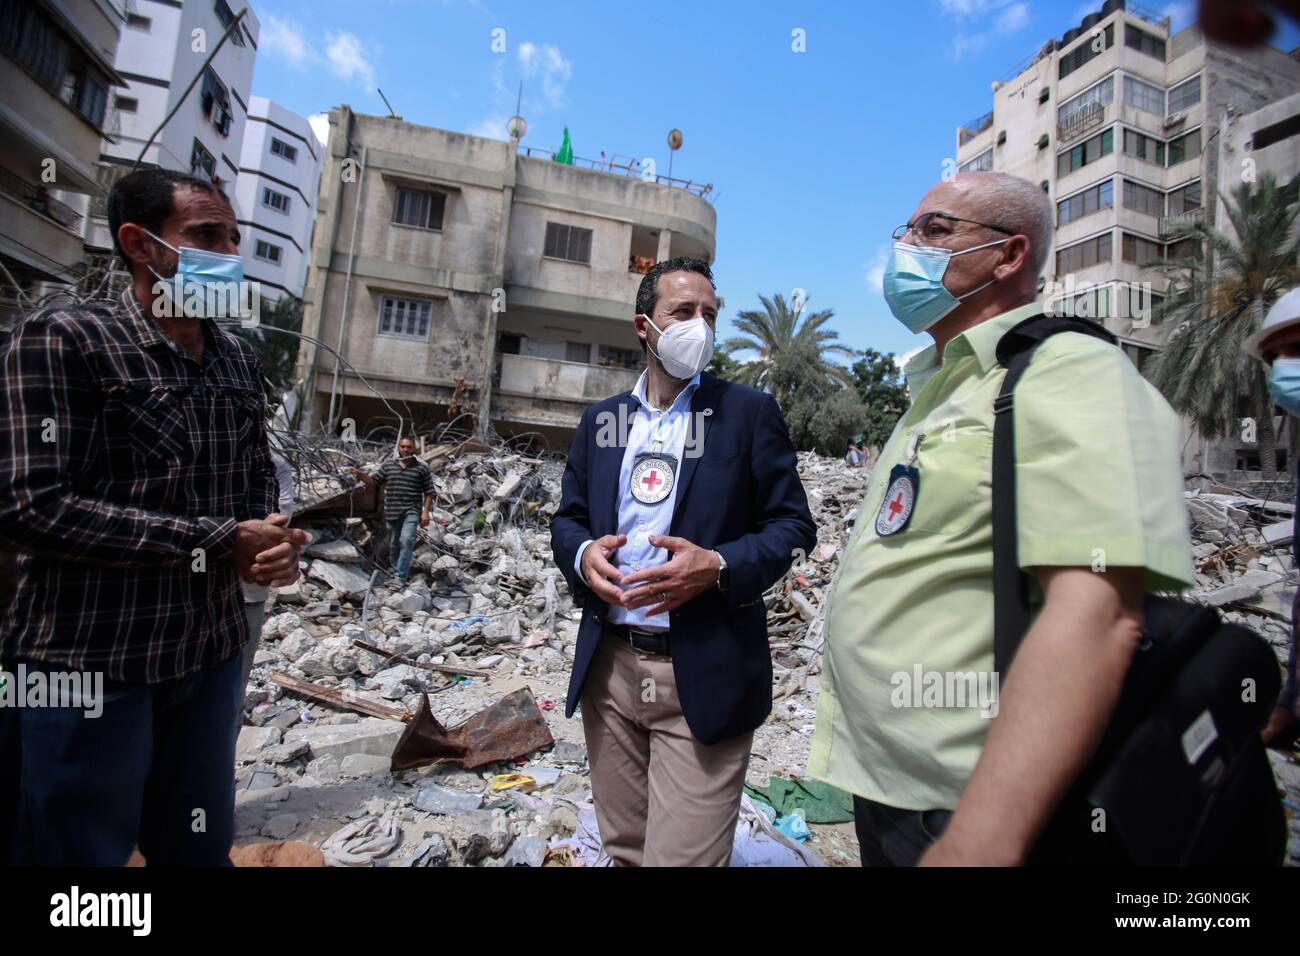 Robert Mardini (Navy blue Jacket), Director General of the International  Committee of the Red Cross (ICRC) along with his team speak to Al Wehda  resident whose home was destroyed in the Israel